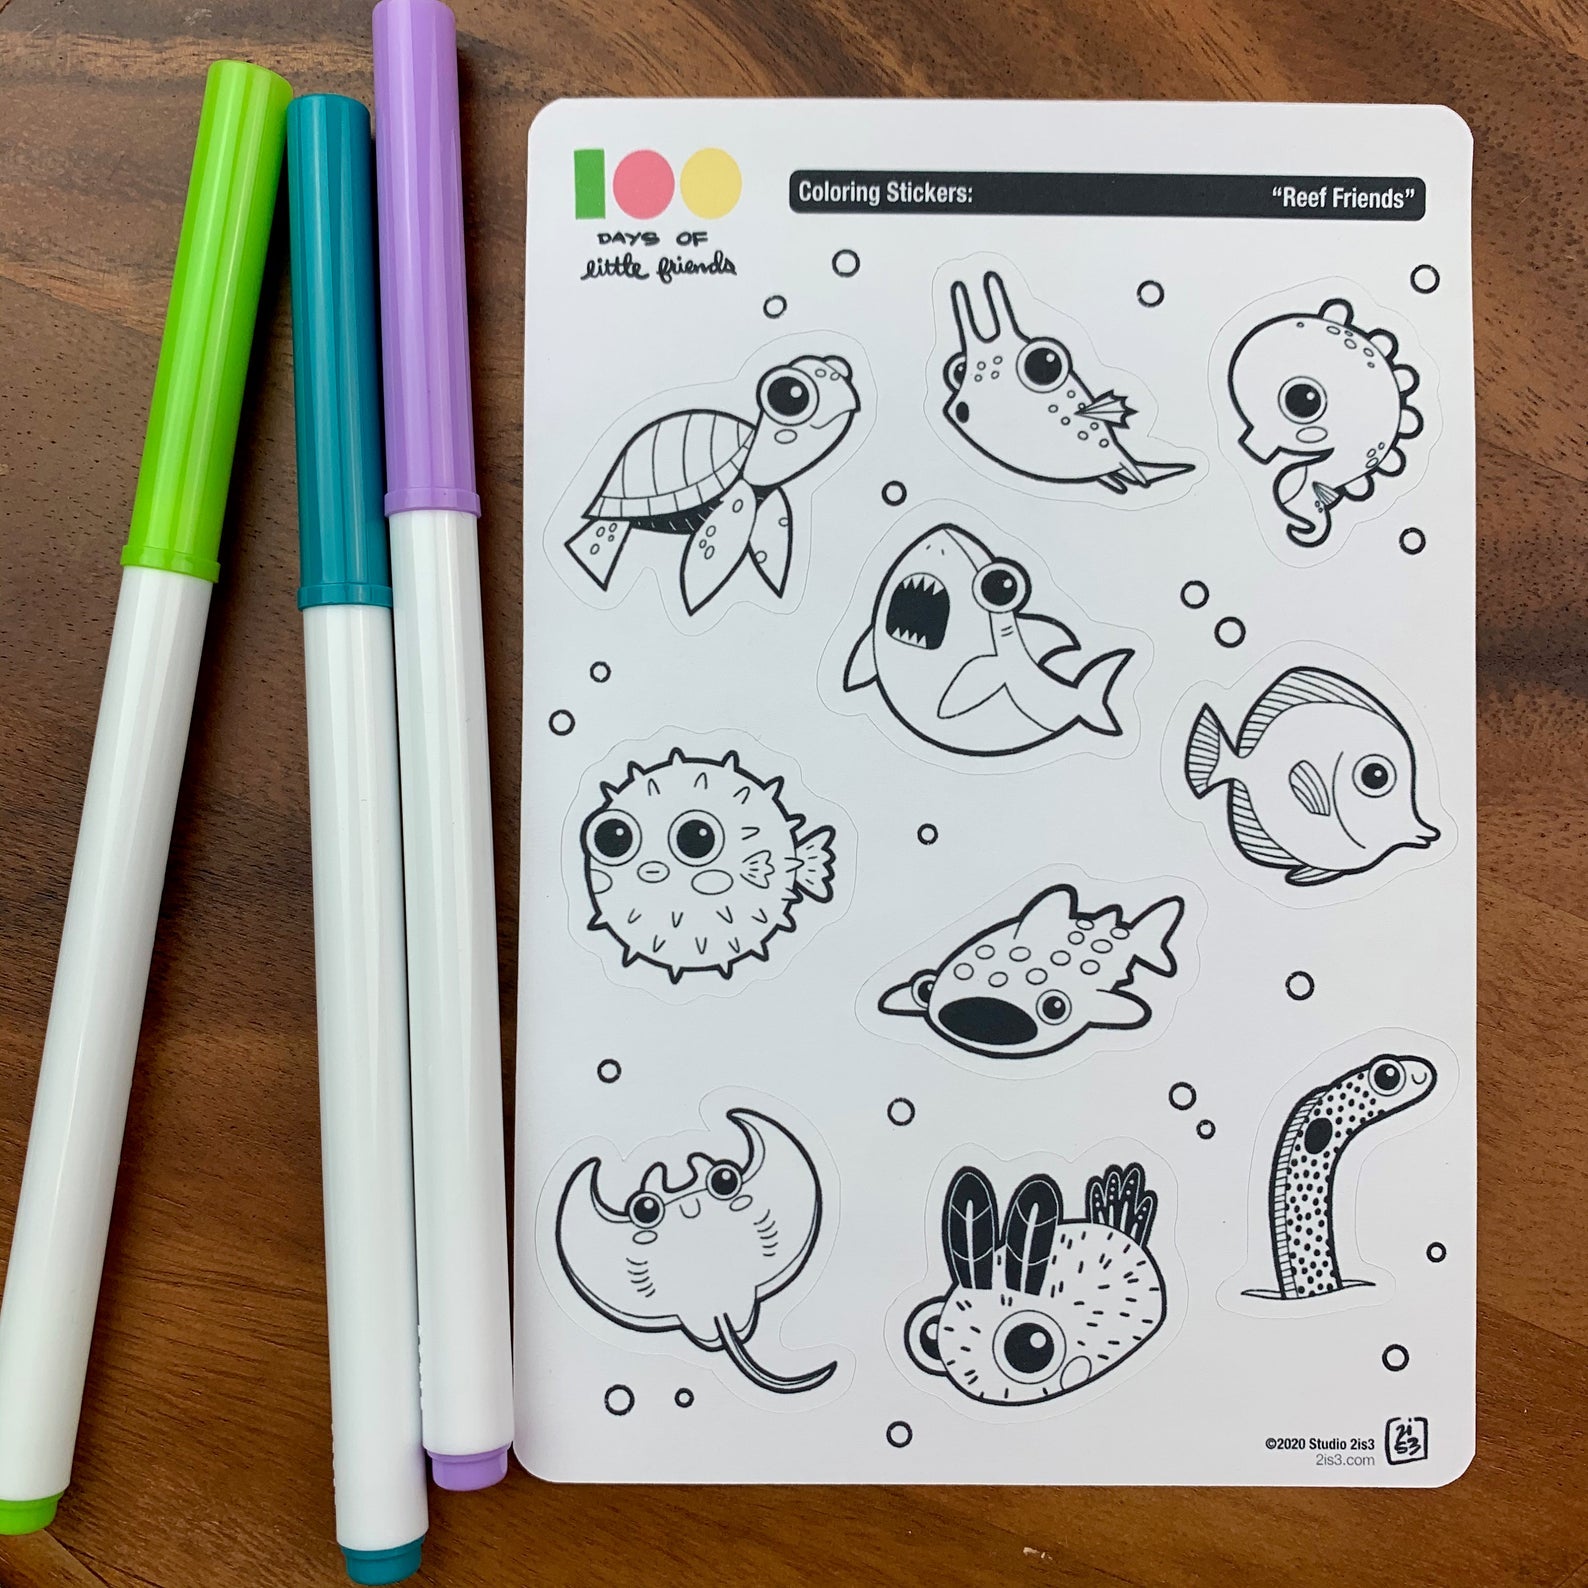 Markers and a sticker sheet with 10 little animal stickers on it. A Sea Turtle, Cowfish, Seahorse, Shark, Pufferfish, Whale Shark, Tang, Ray, Nudibranch, and Garden Eel.